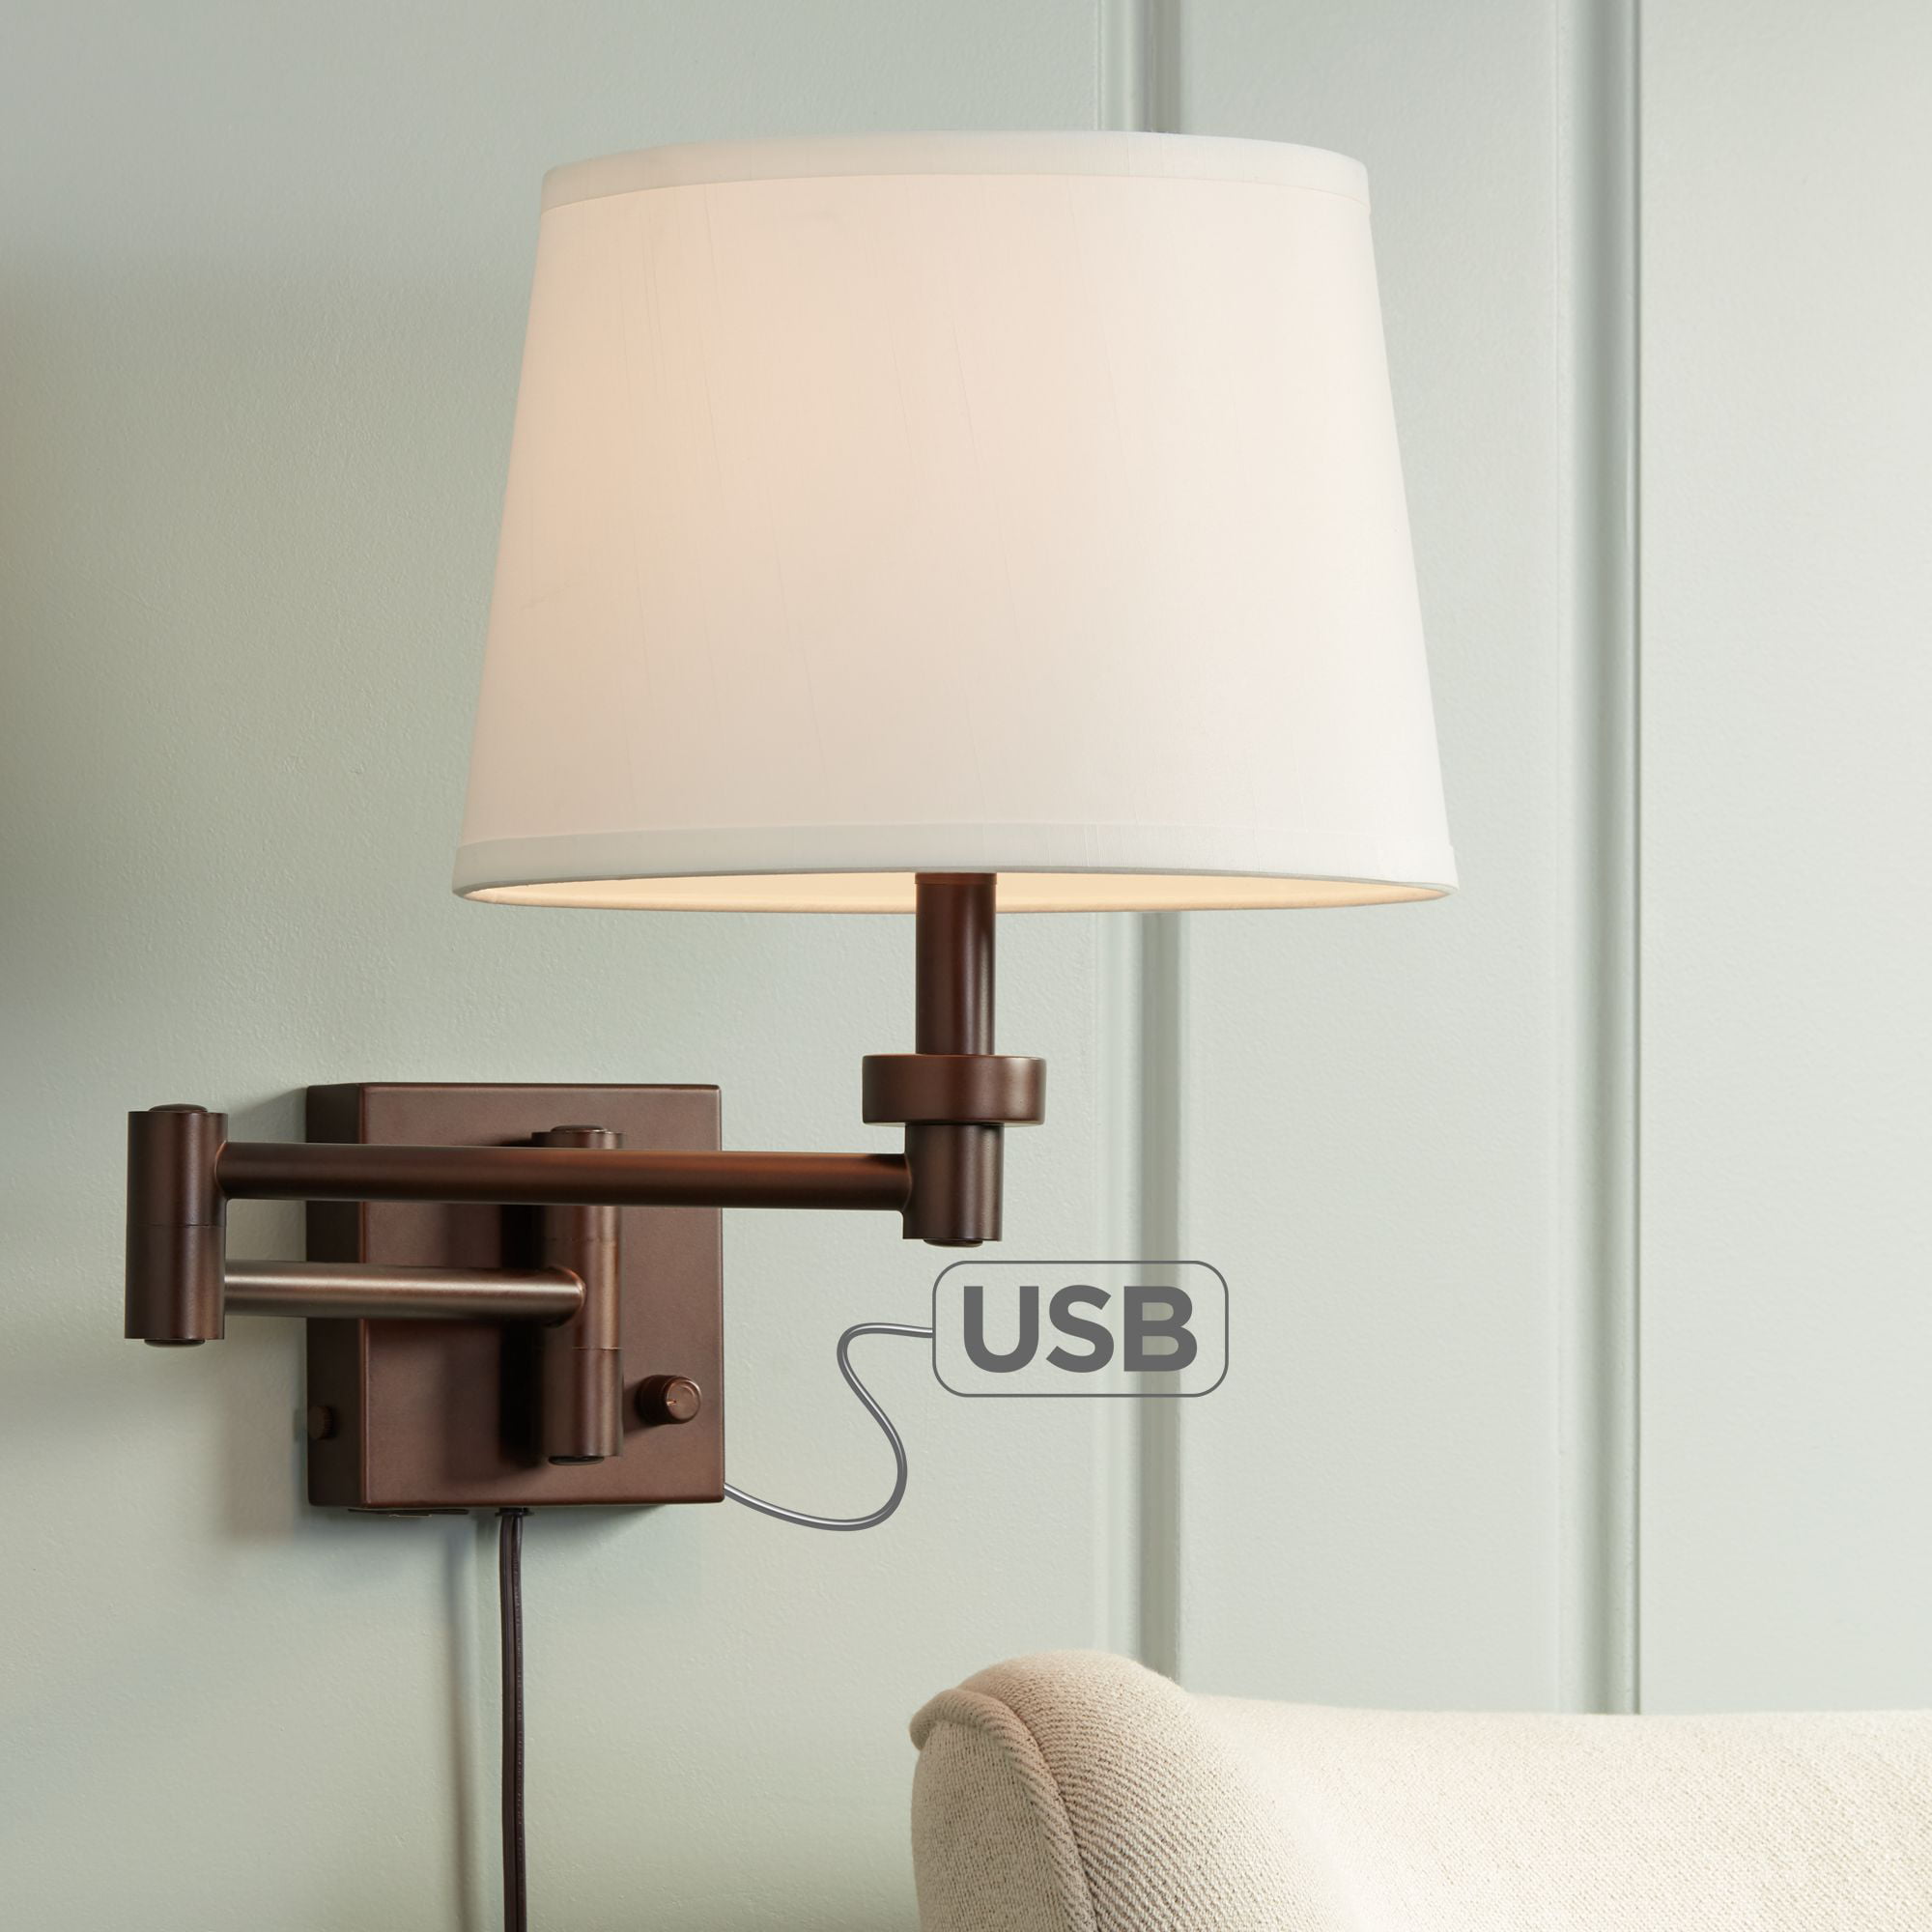 Modern Swing Arm Wall Lamp with USB Oiled Bronze Plug-In Light Fixture Bedroom 